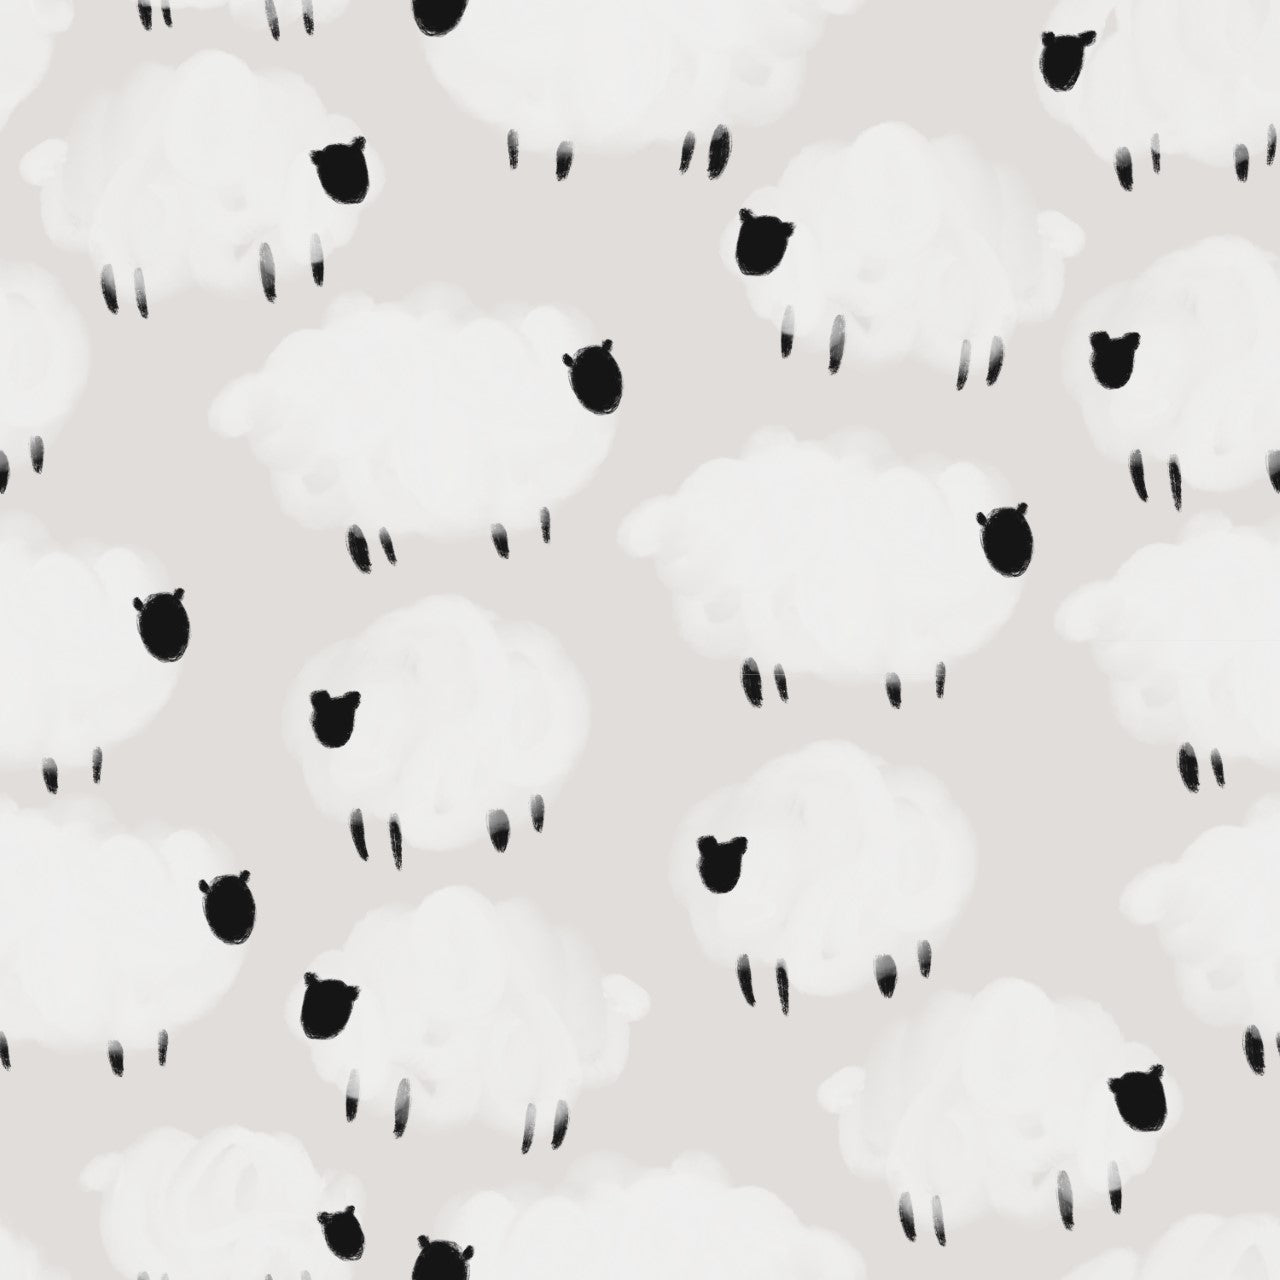 Counting sheep cute lambs on pastel pink background easy to install and remove peel and stick custom wallpaper available in different lengths/sizes locally created and printed in Canada. Removable, washable, durable, commercial grade, customizable and water proof.